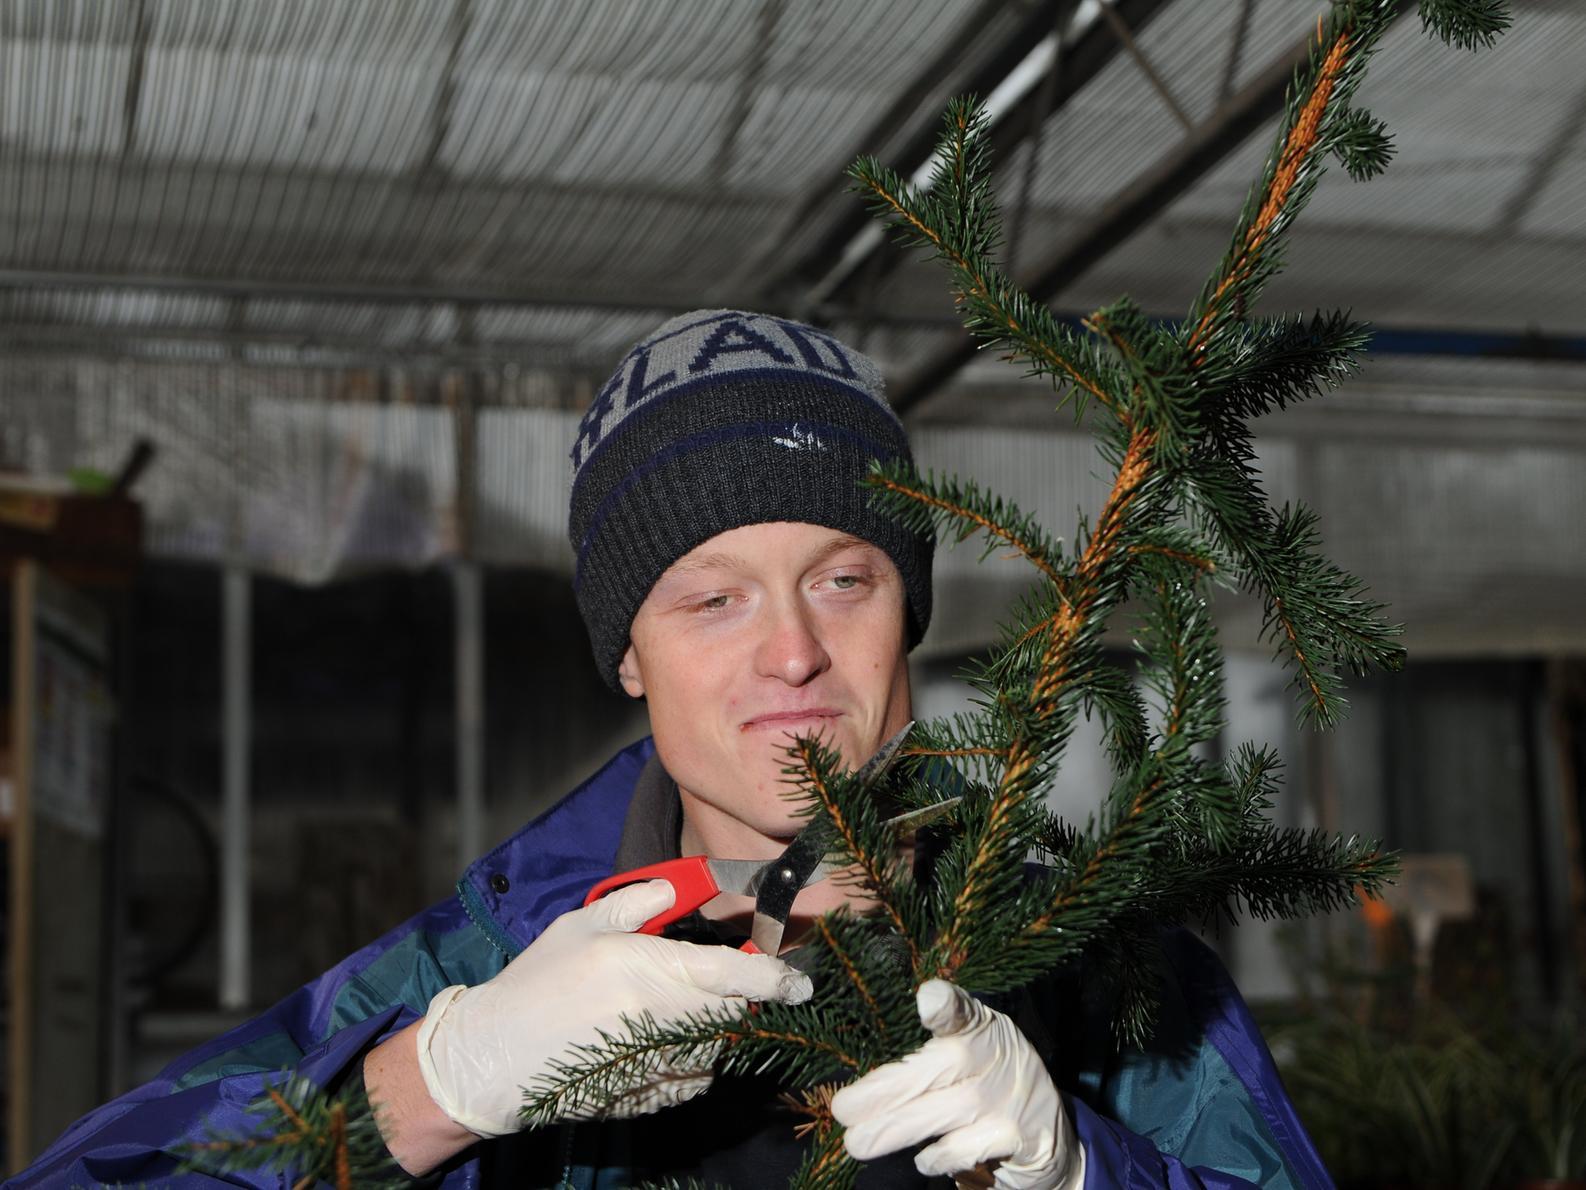 Horticap is always a popular choice for Christmas trees.